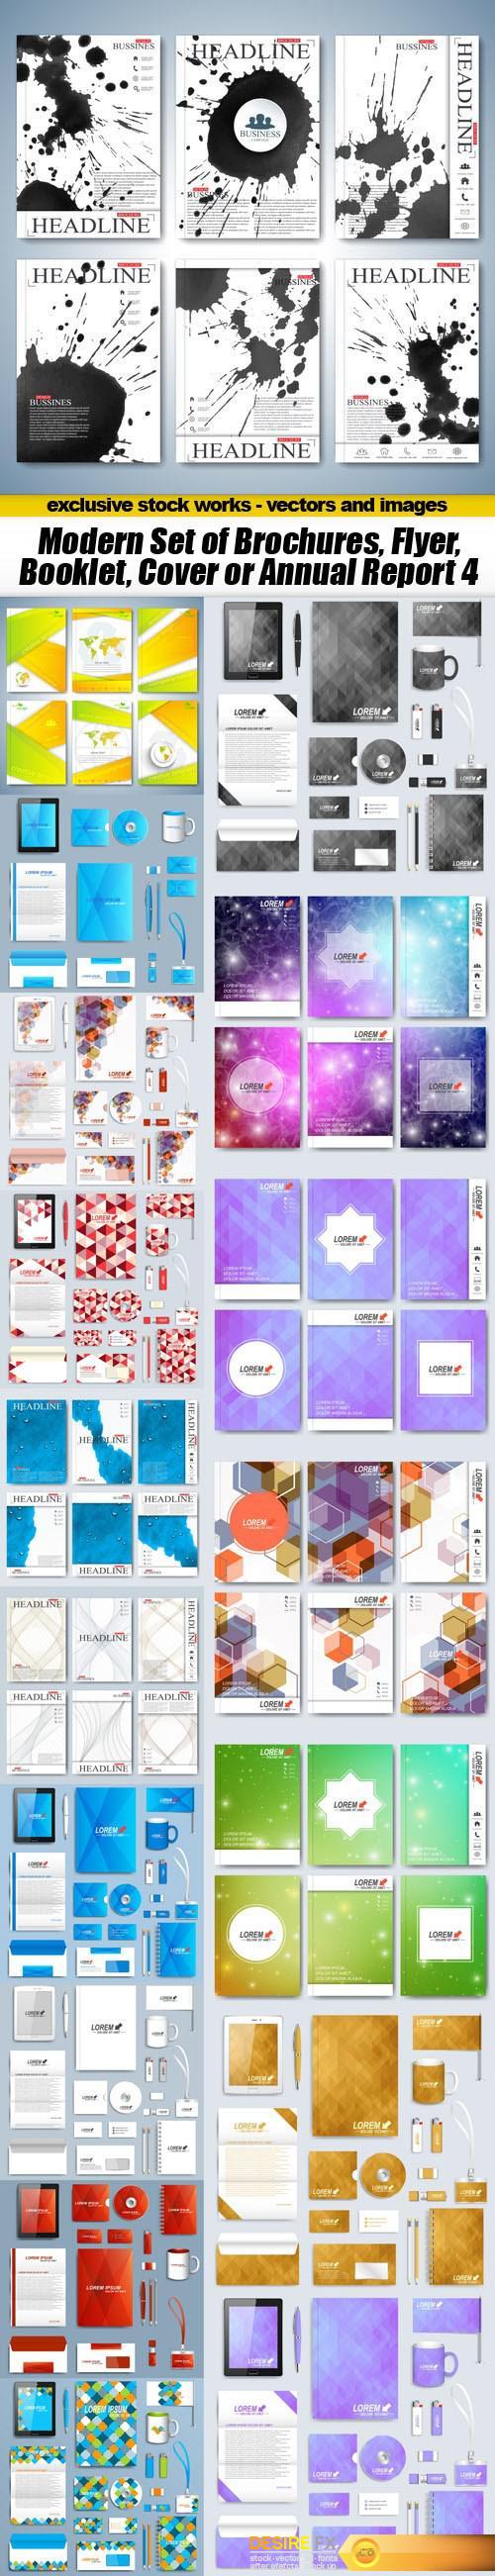 Modern Set of Brochures , Flyer, Booklet, Cover or Annual Report 4 - 18xEPS